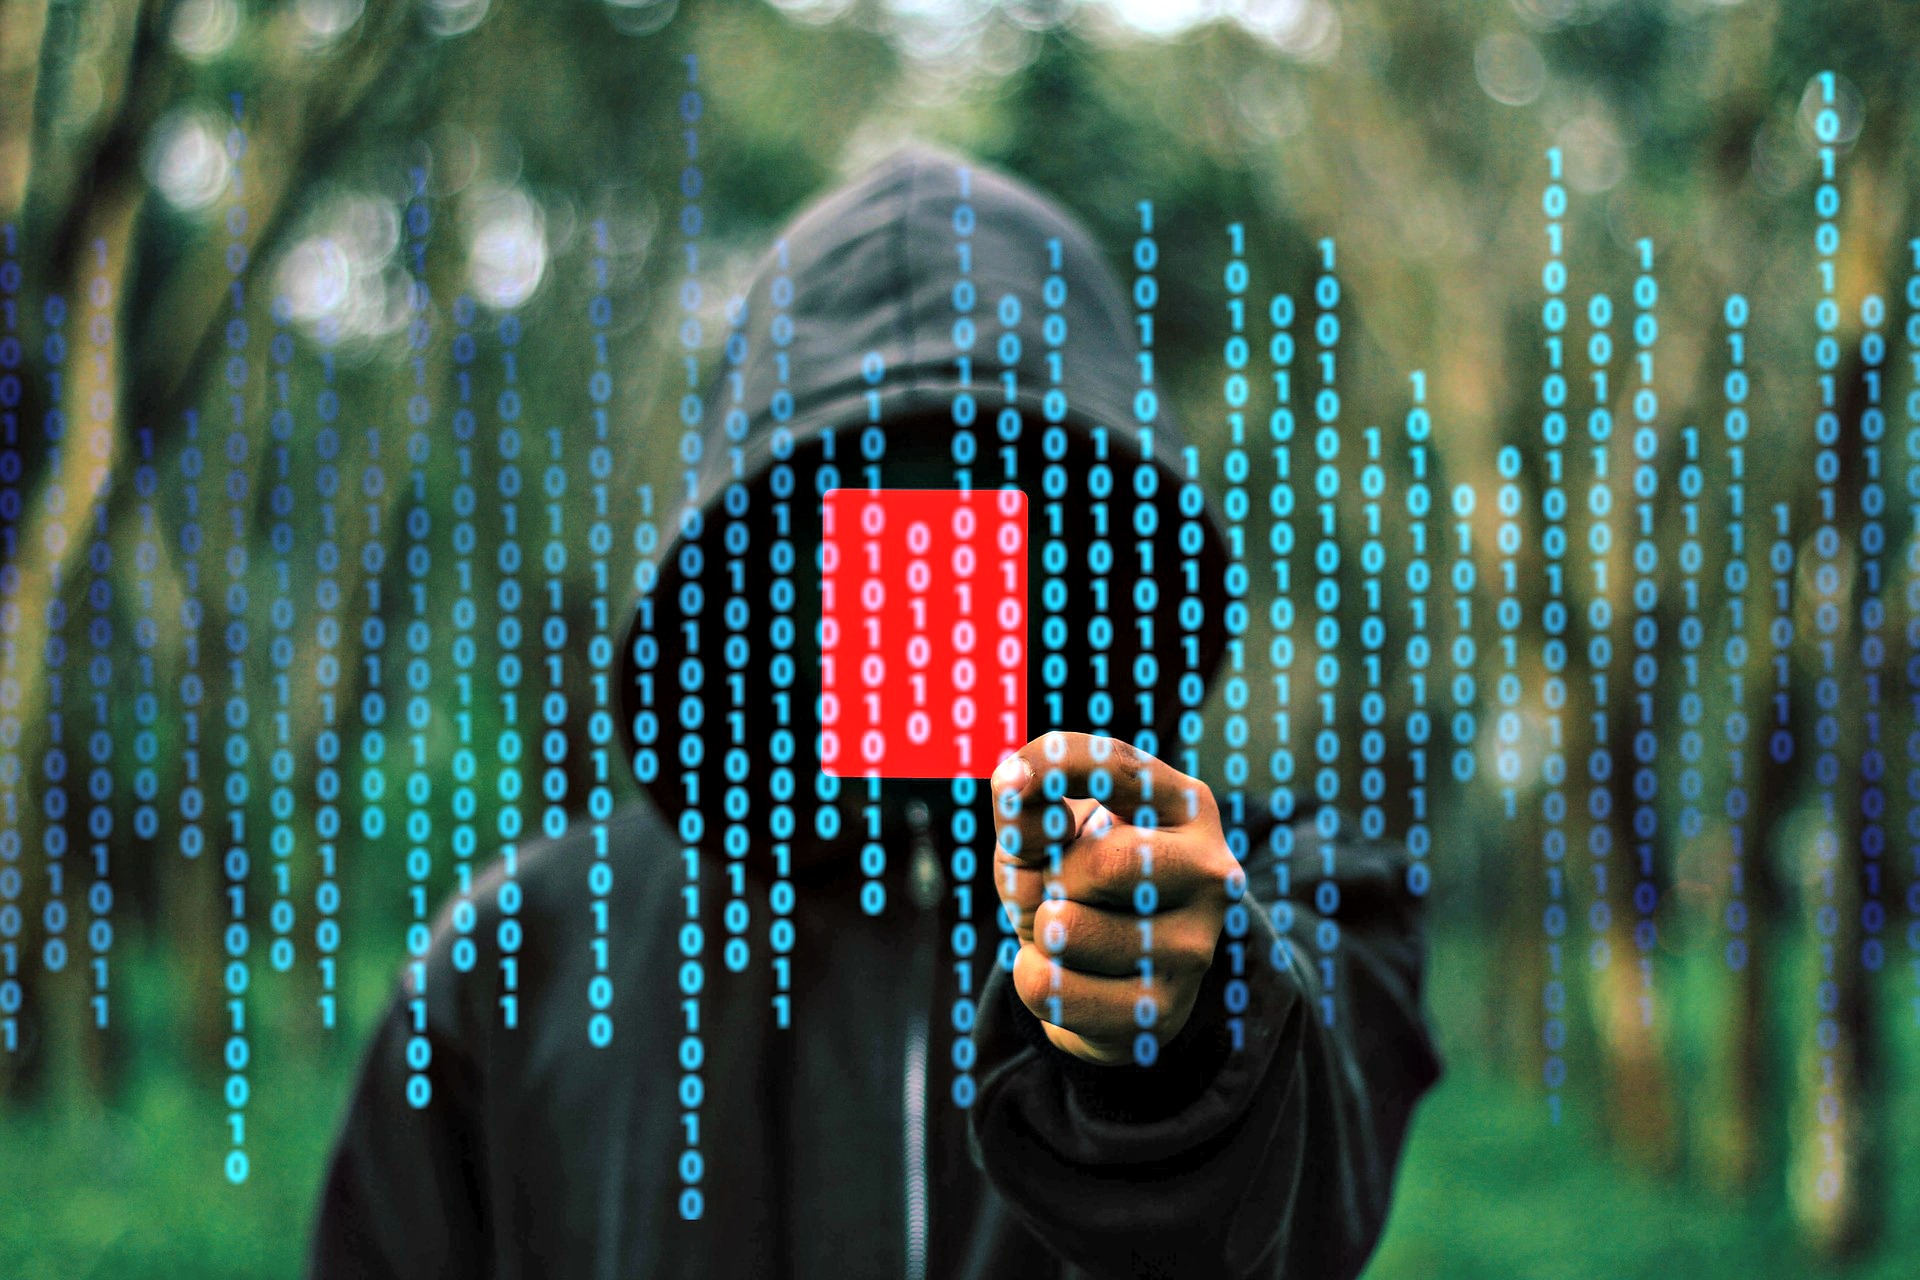 A hooded man (hacker) pointing at the camera with 0s and 1s